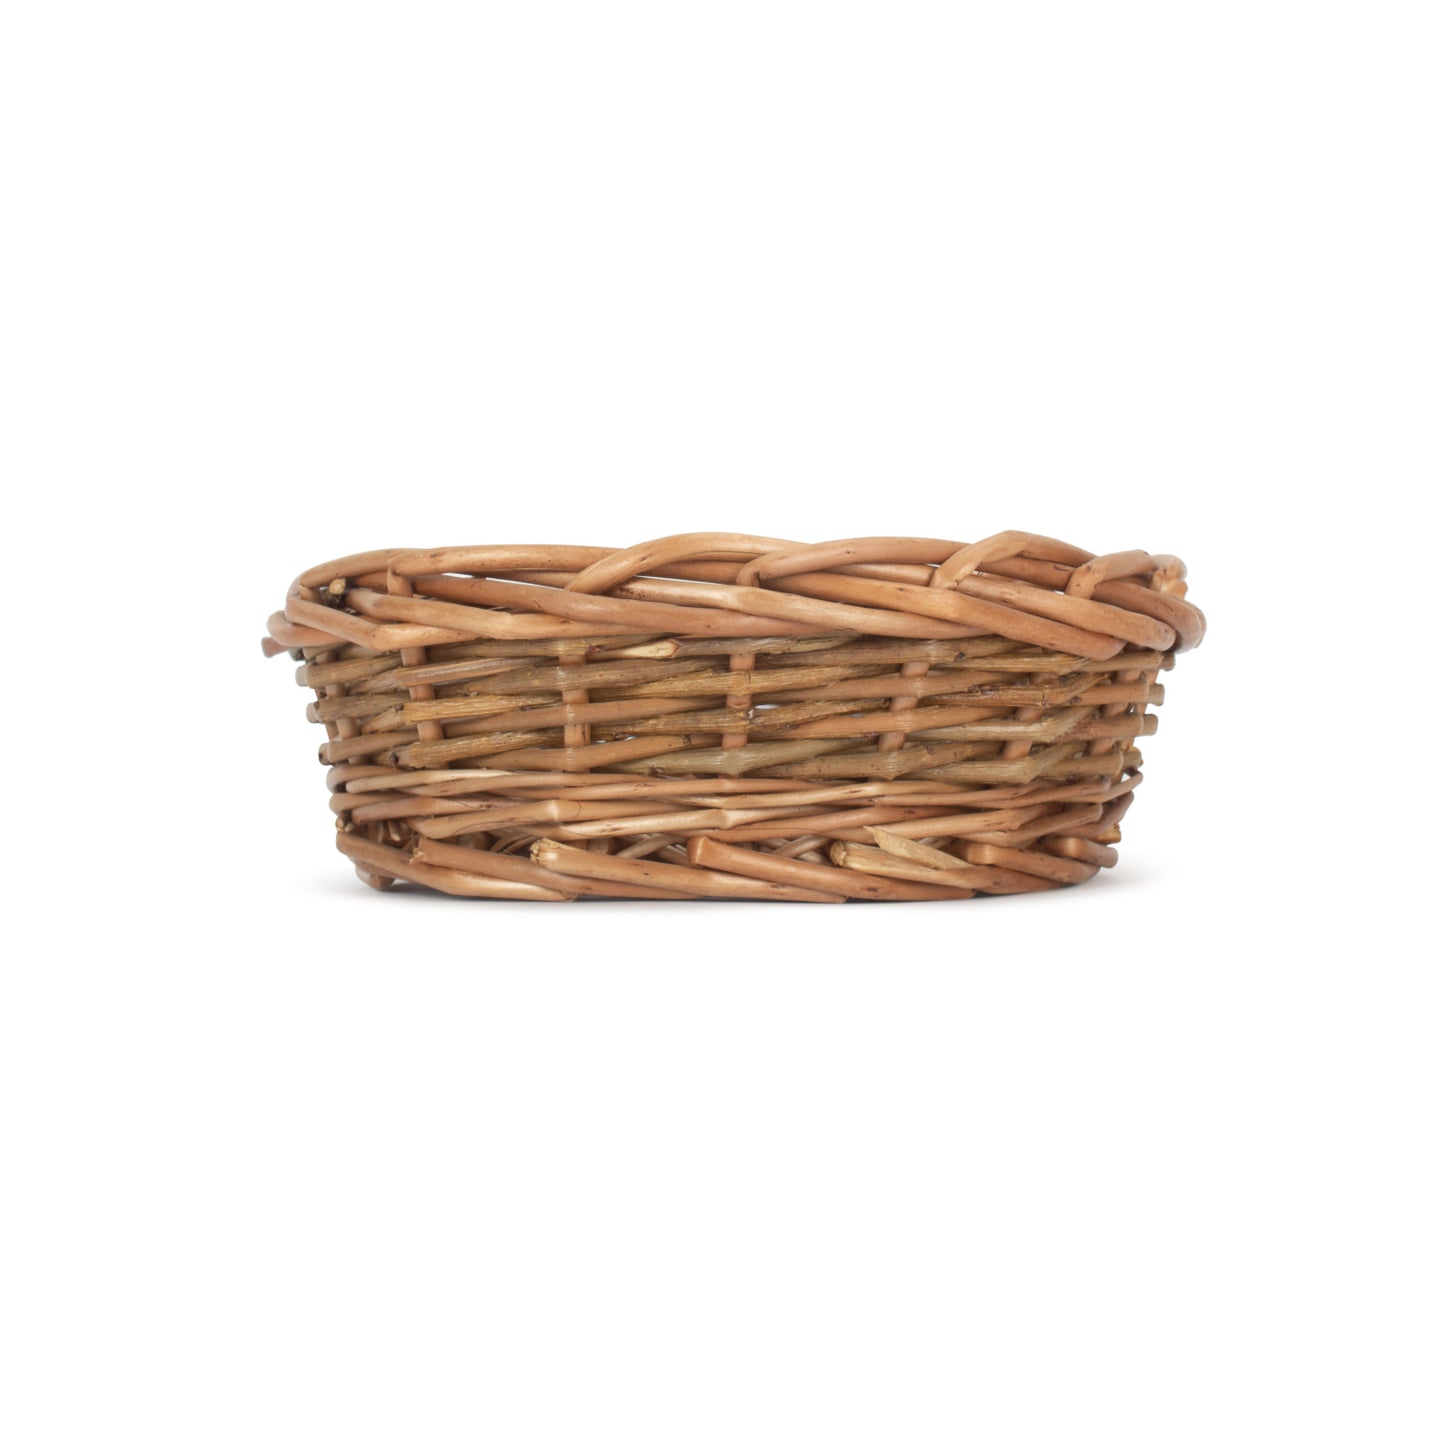 Small Unpeeled Willow Round Tray